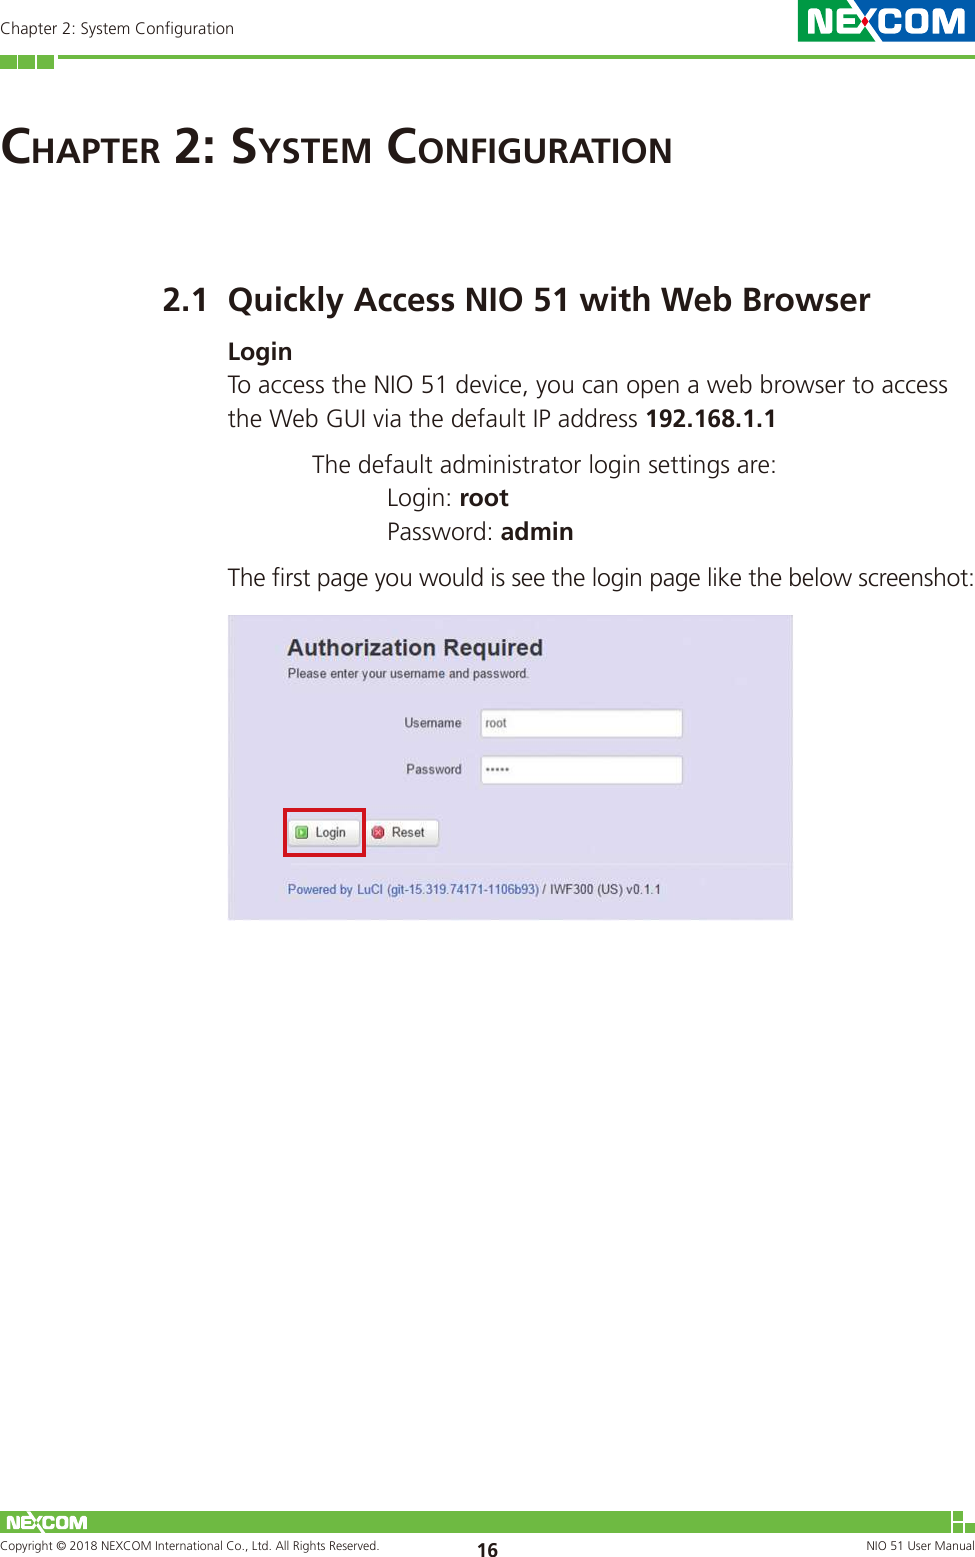 Copyright © 2018 NEXCOM International Co., Ltd. All Rights Reserved. NIO 51 User Manual 16Chapter 2: System ConfigurationChaPter 2: system Configuration2.1  Quickly Access NIO 51 with Web BrowserLoginTo access the NIO 51 device, you can open a web browser to access the Web GUI via the default IP address 192.168.1.1   The default administrator login settings are:   Login: root   Password: adminThe first page you would is see the login page like the below screenshot: